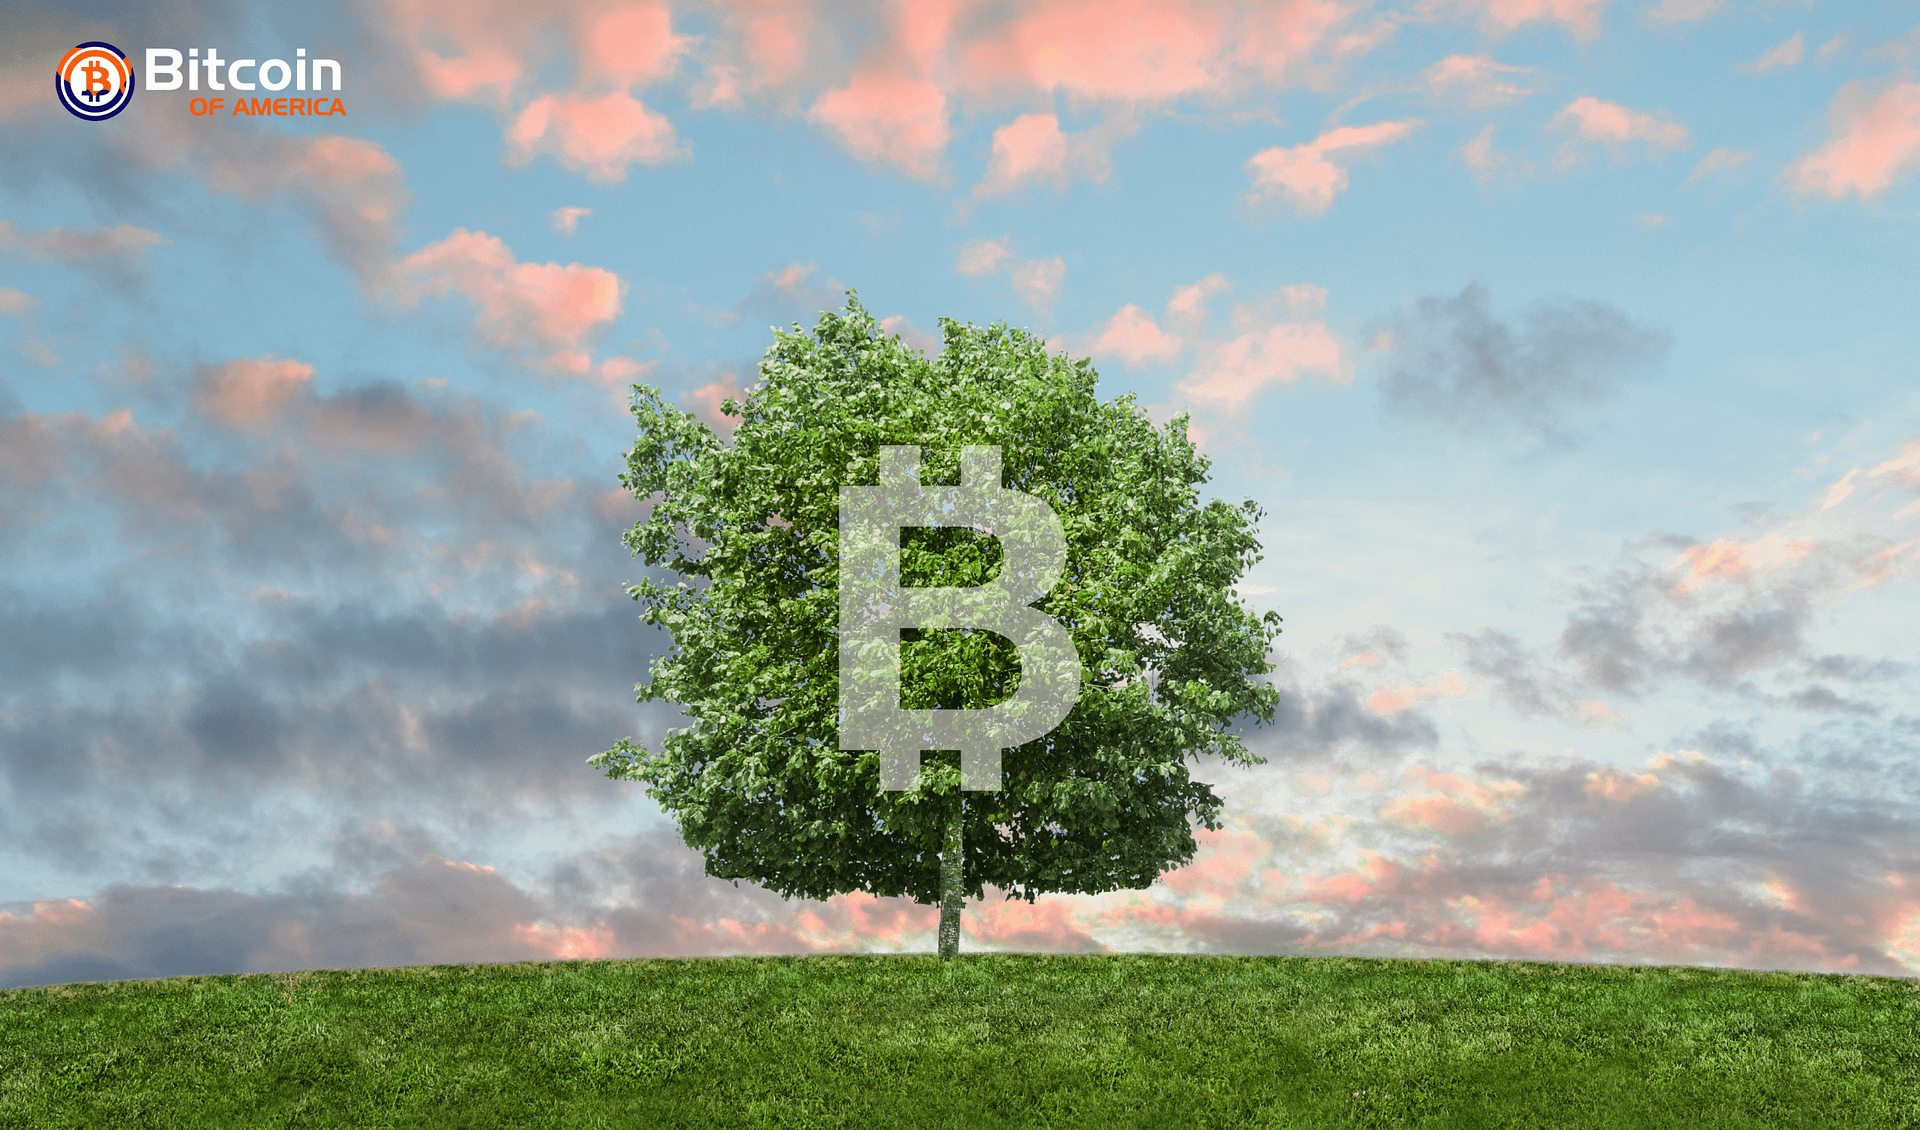 Bitcoin and the Environment